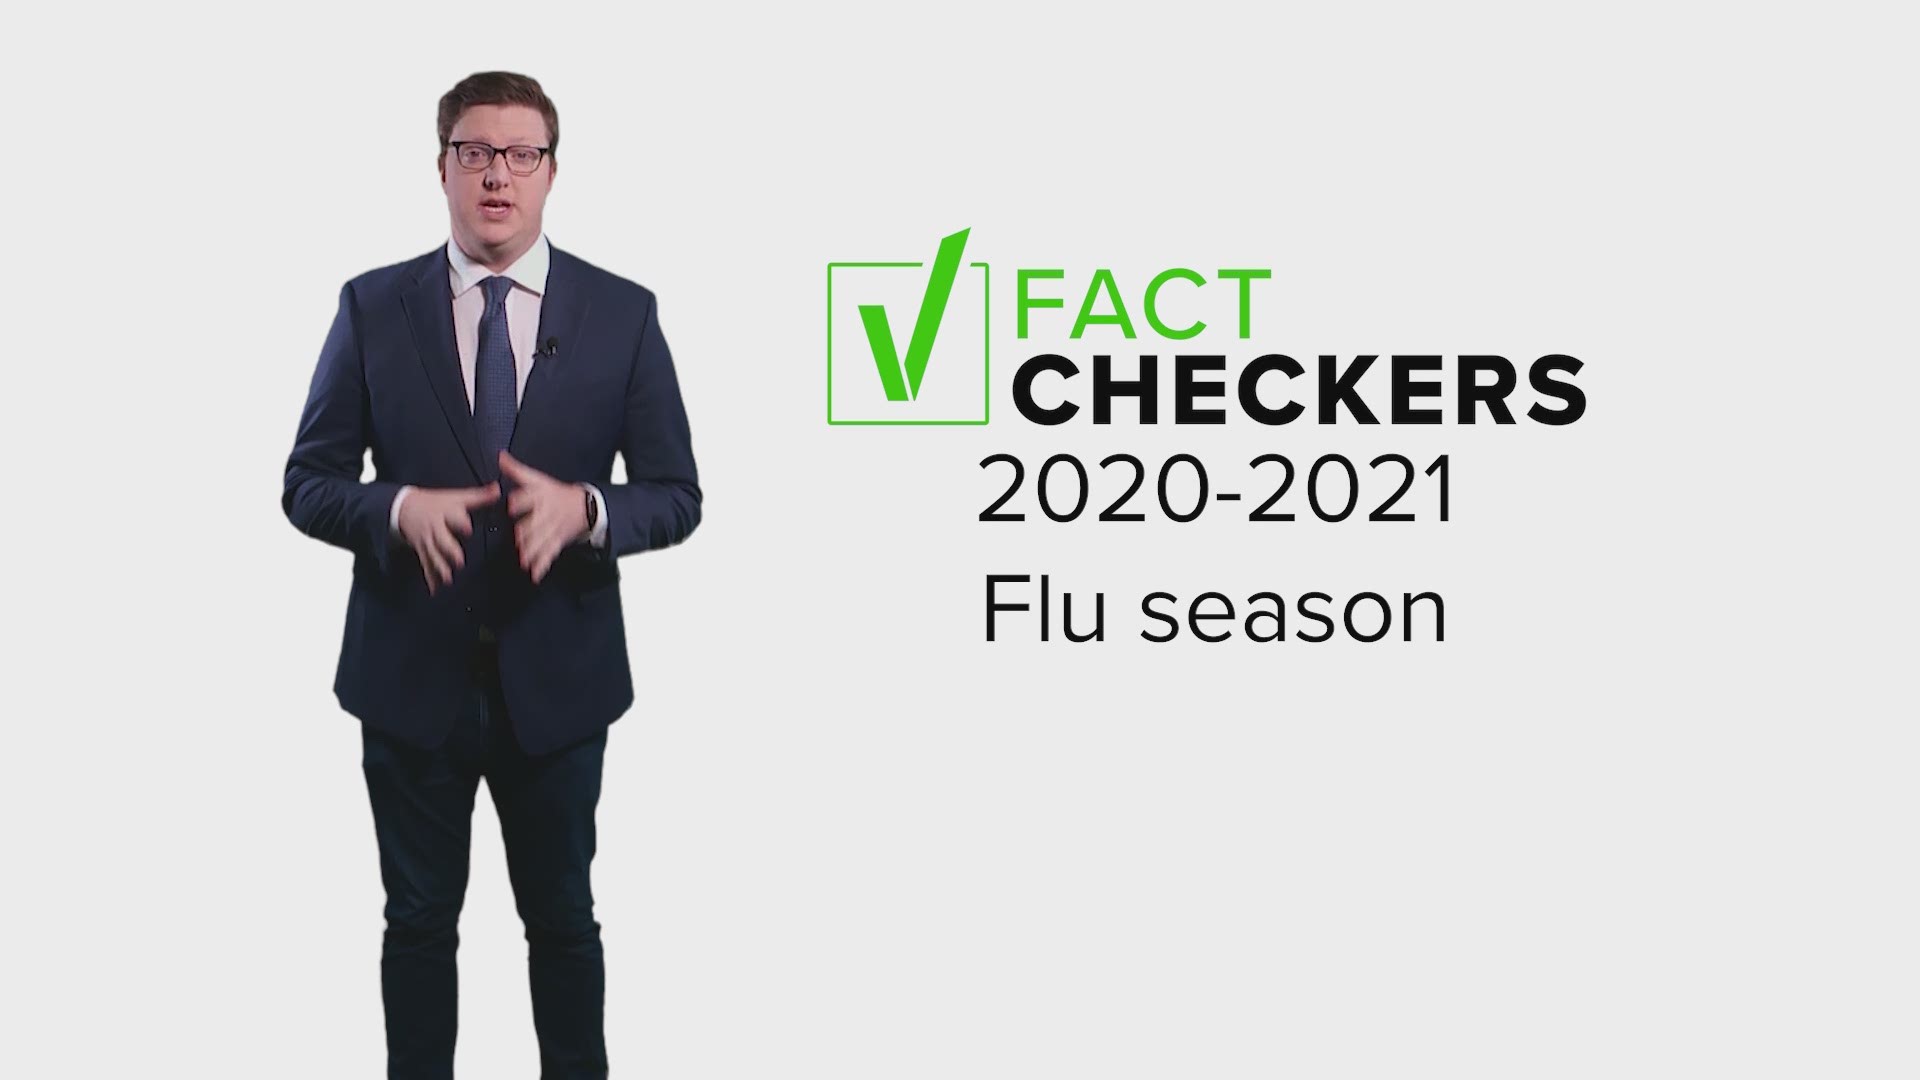 Flu activity is at its lowest in 25 years. Experts believe that could be in large part because of efforts to stop COVID spread and increased vaccinations.